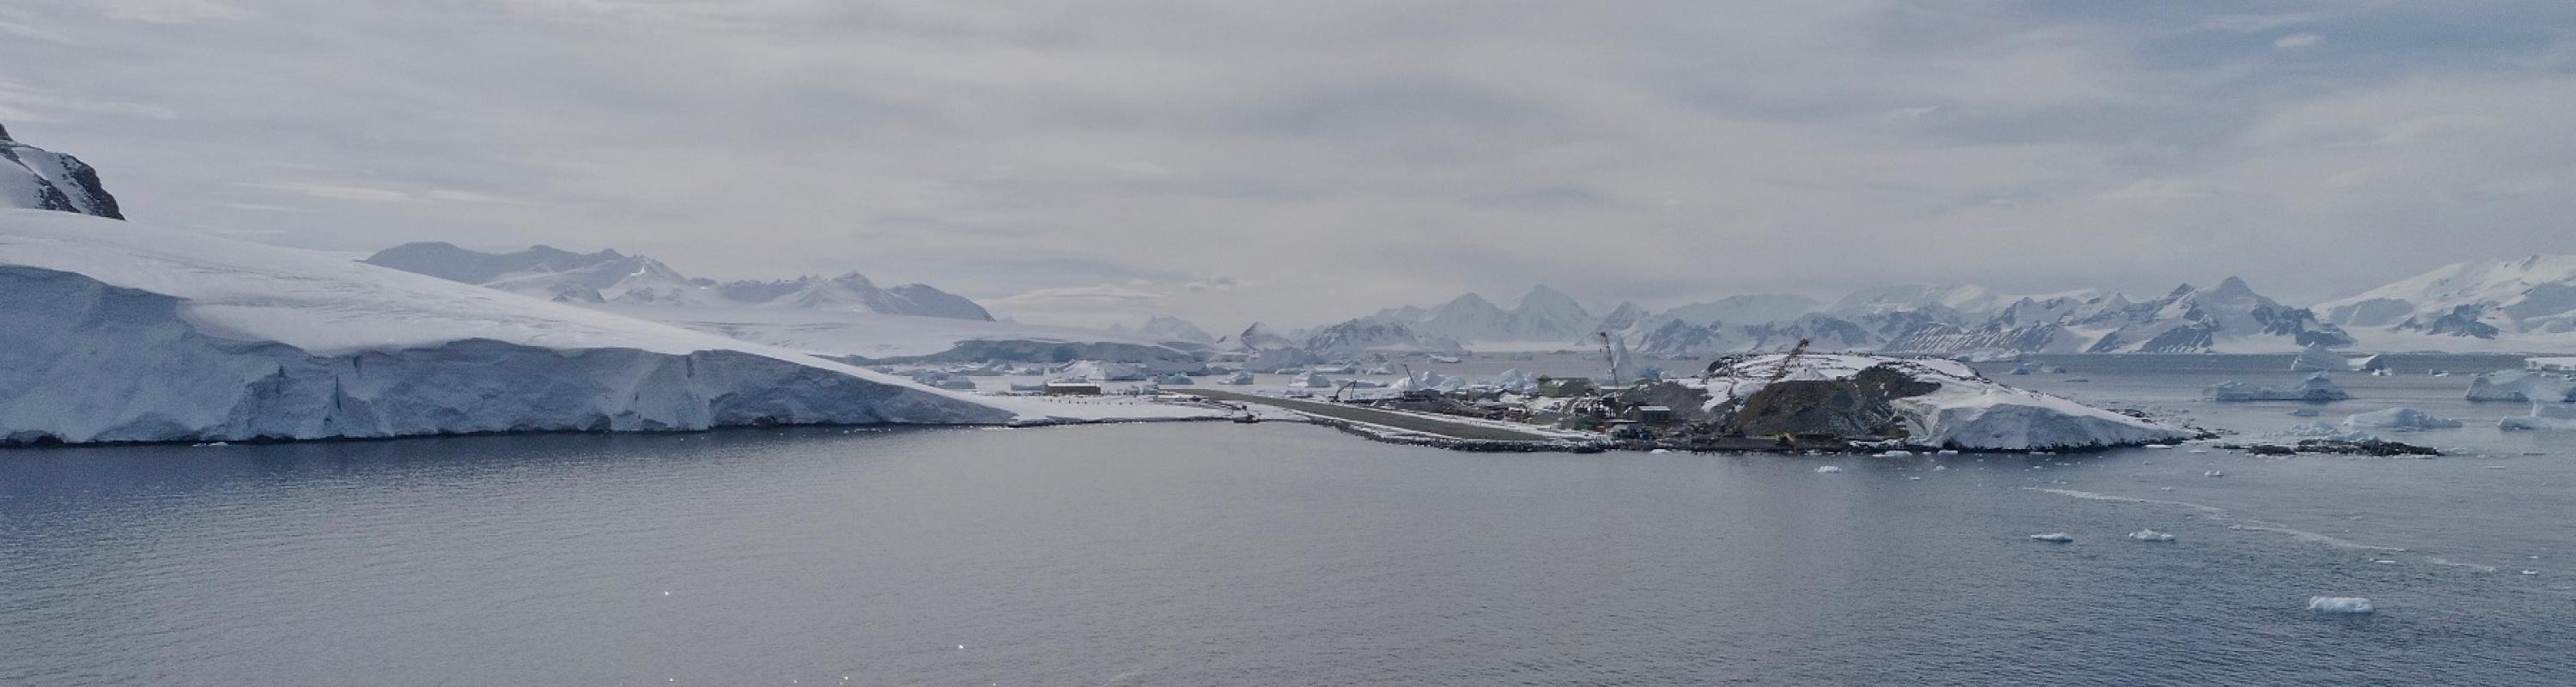 View of Rothera Station from a drone above the Nathaniel B. Palmer. Photo credit: Aleksandra Mazur